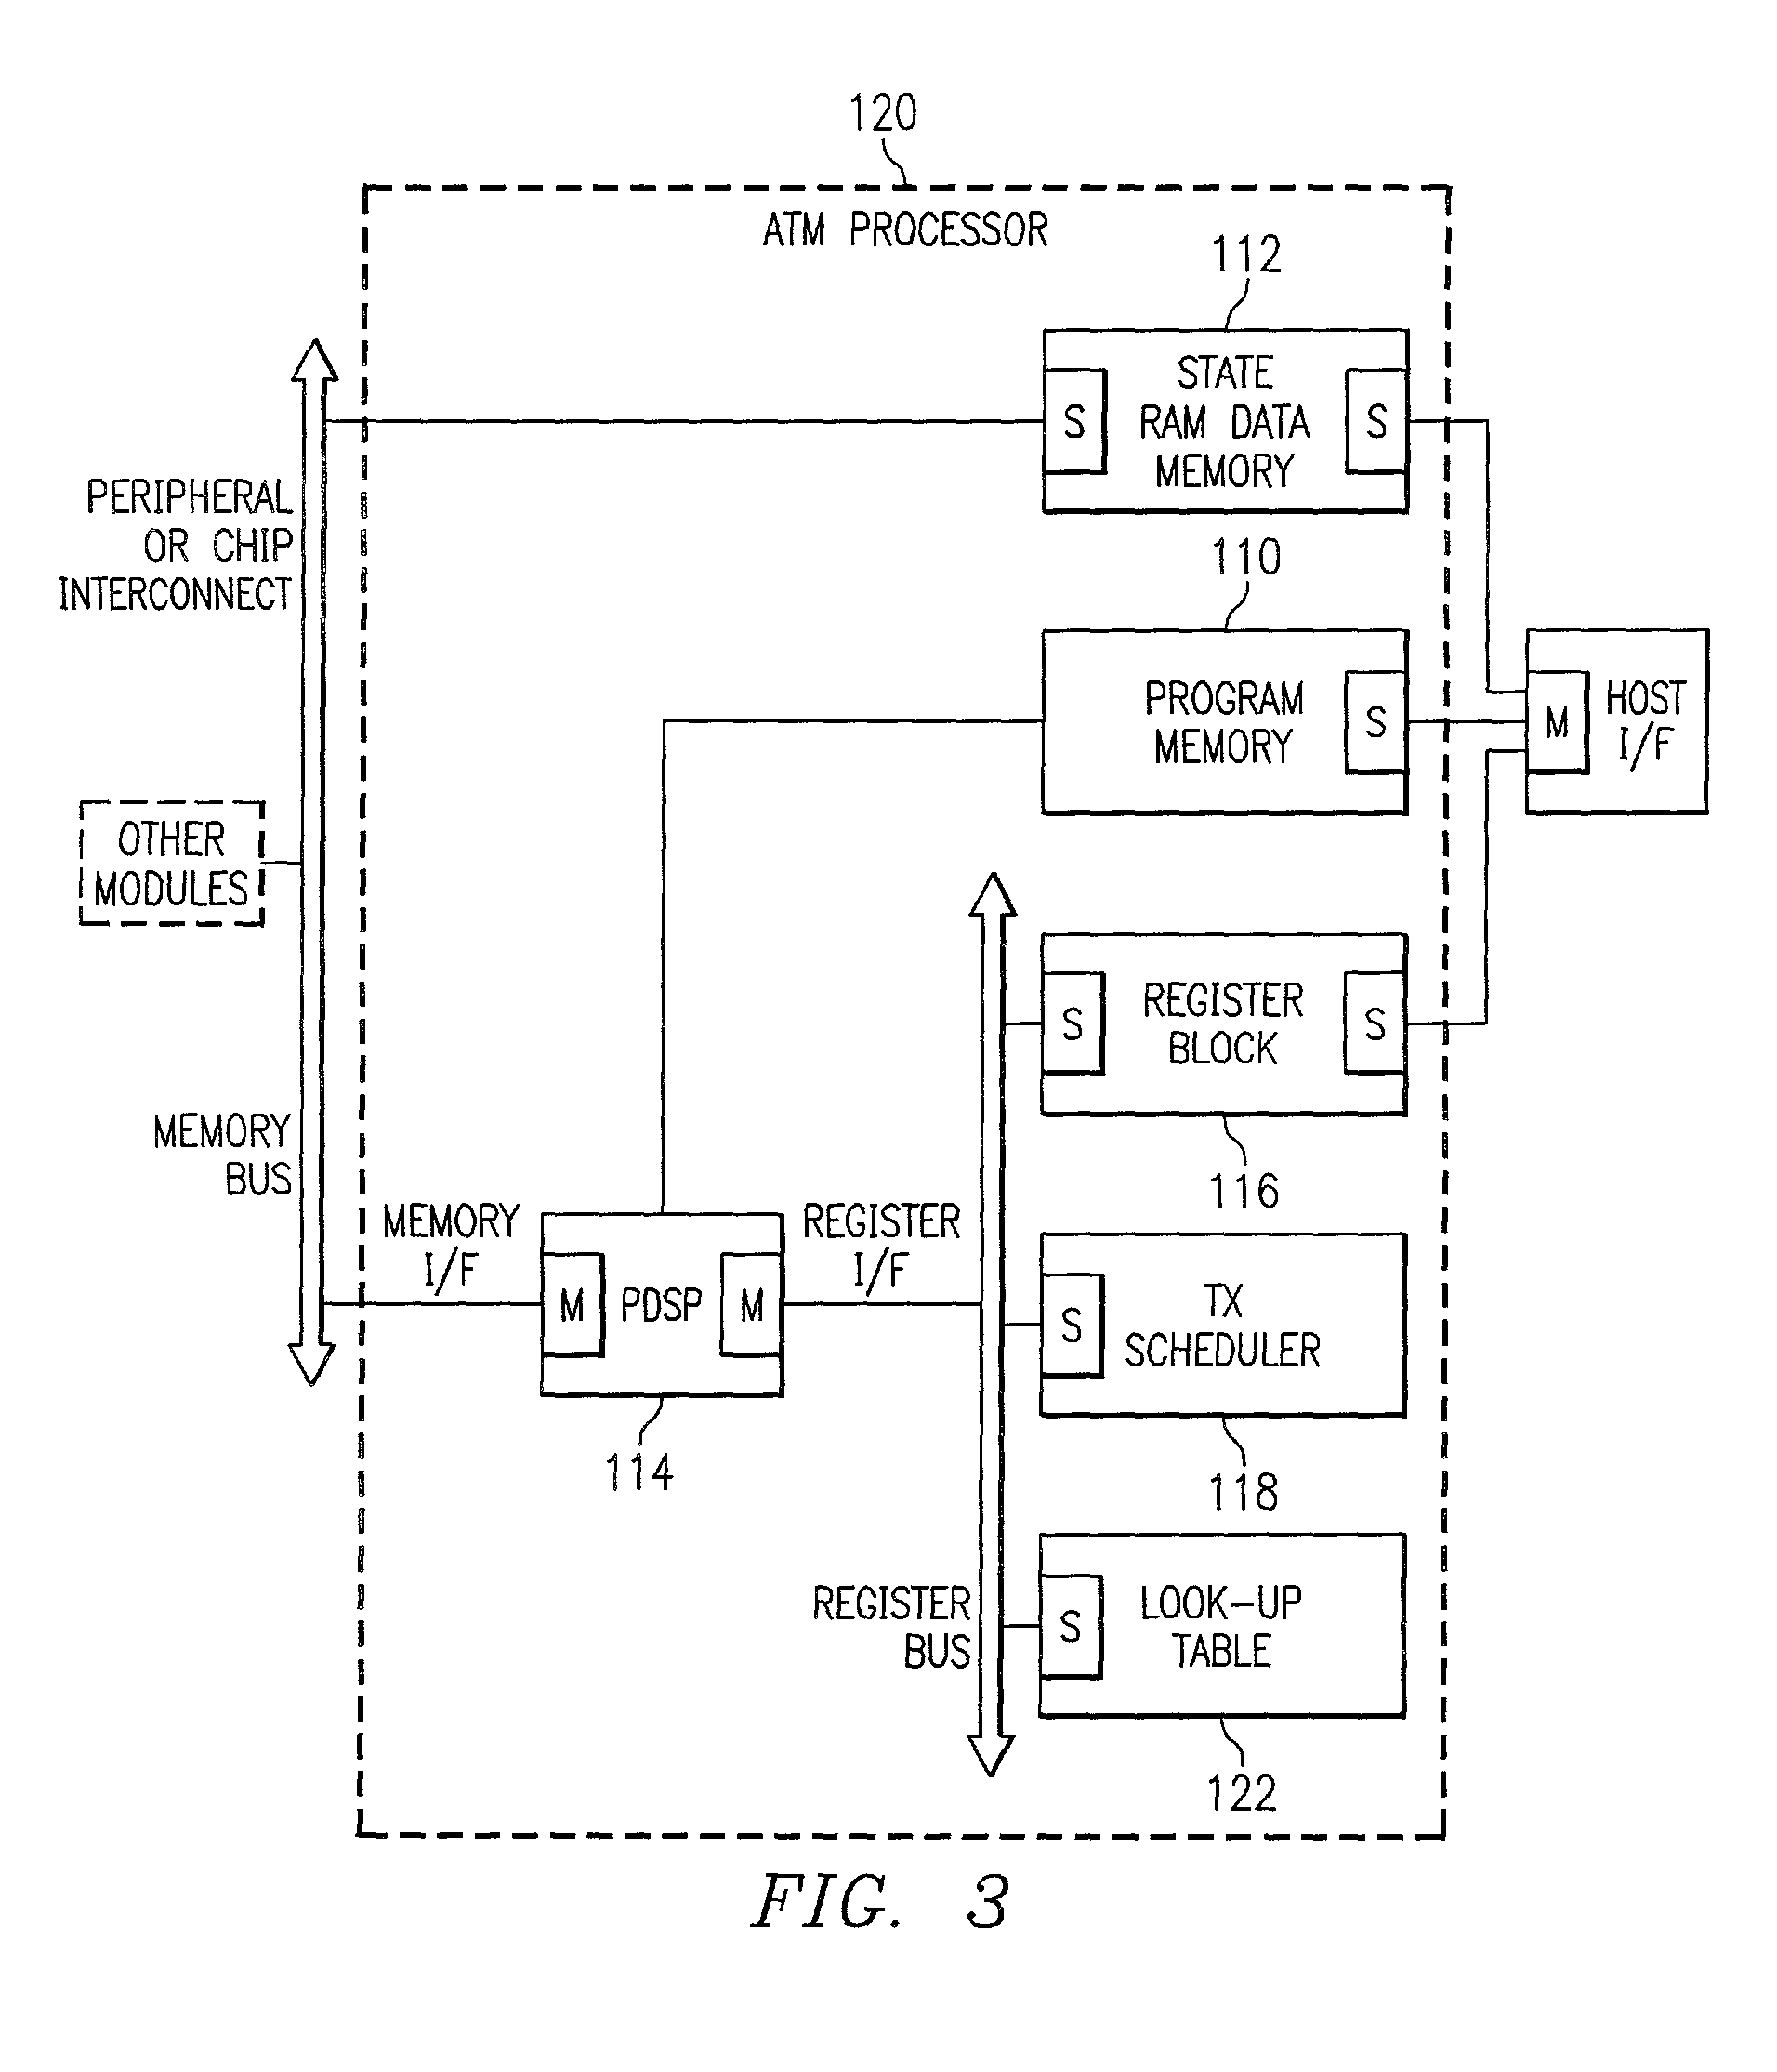 AAL2 receiver for filtering signaling/management packets in an ATM system